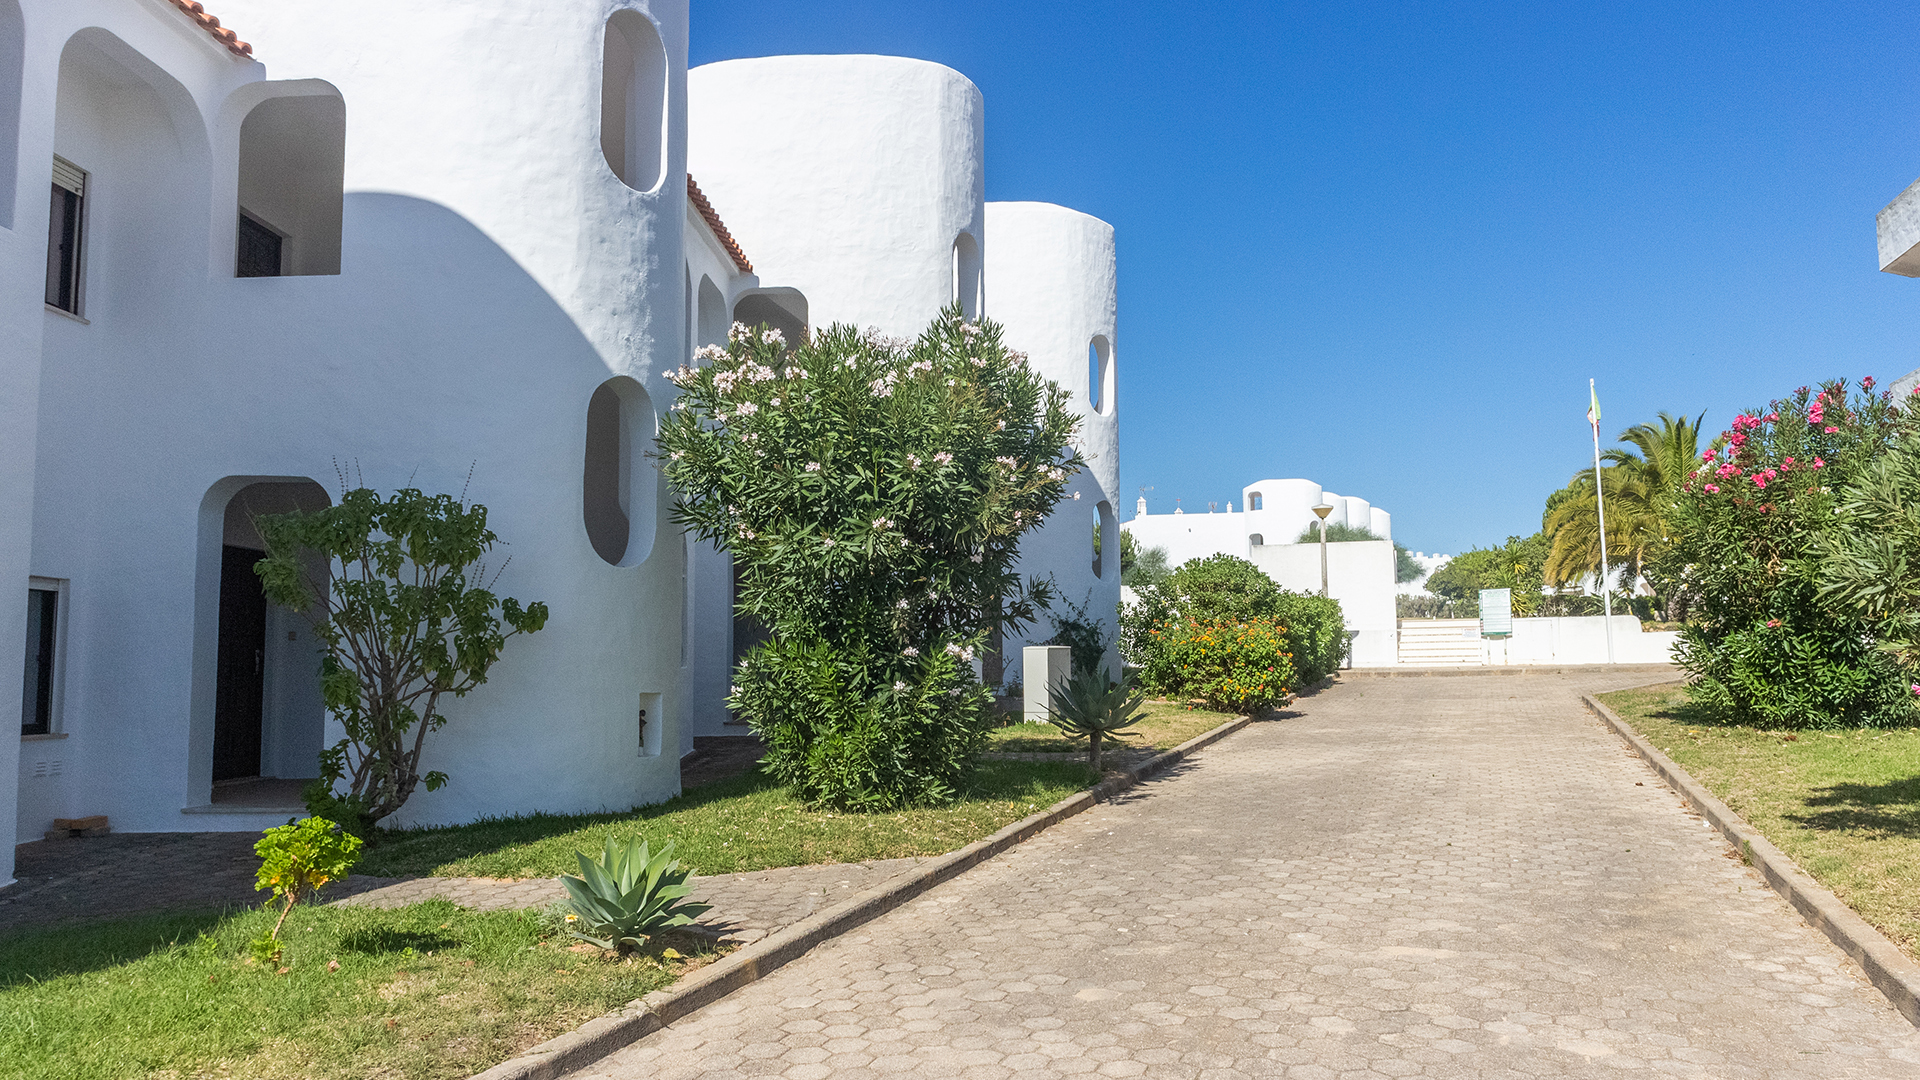 1+1 bedroom apartment with communal pool close to beaches, Porches | LG2084 The 1+1 bedroom apartment is in a great location, close to various Algarve beaches and all amenities.